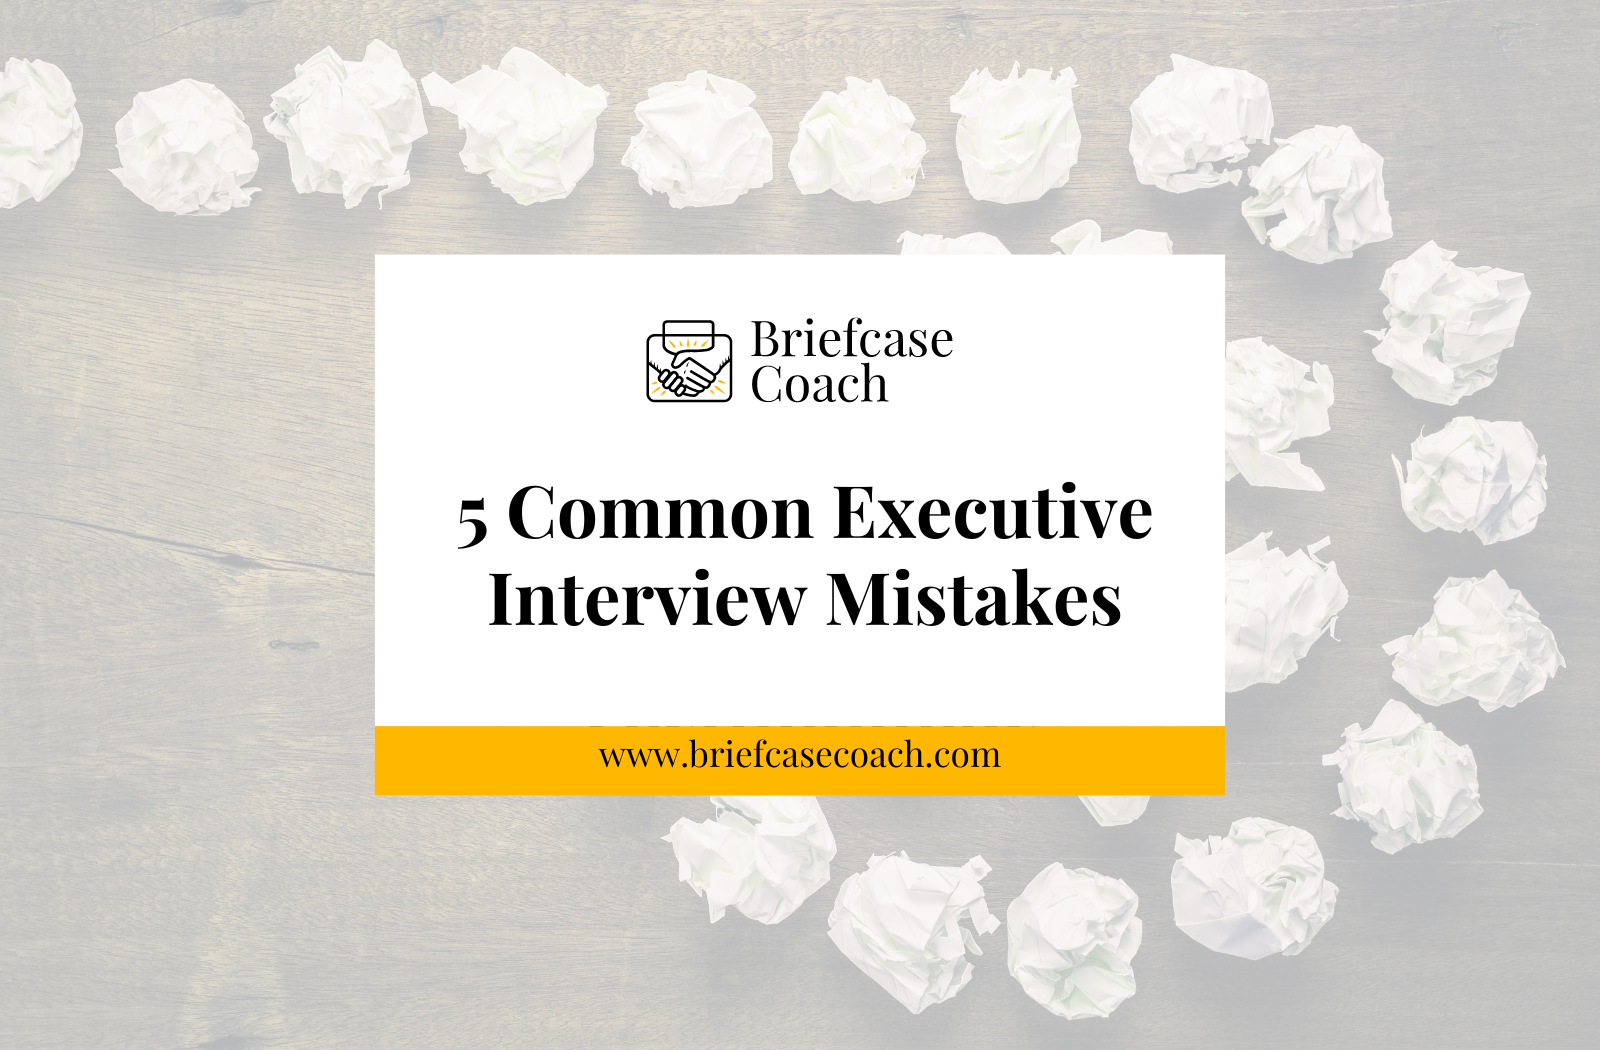 5 Common Executive Interview Mistakes to Avoid